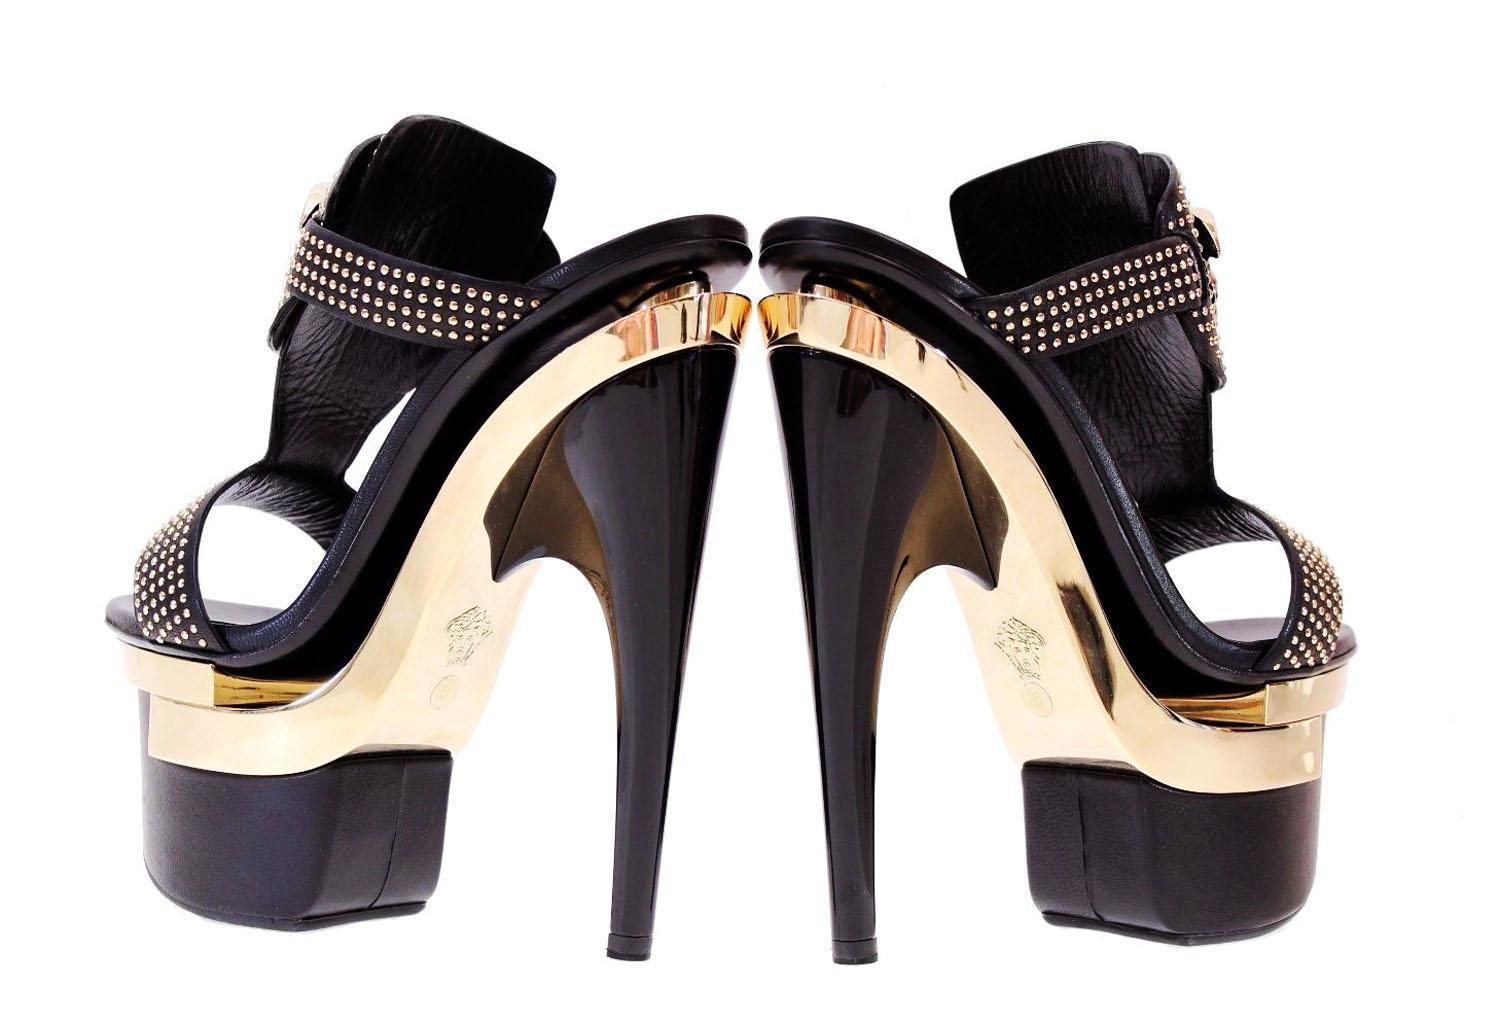 New Versace Triple Platform Studded Sandals Shoes
Italian size - 40 ( US 10)
Black leather sandals finished with gold-tone Medusa and metal studs. 
Heel height - 7 inches ( 18 CM ) , Gold-tone metal and black leather platform - 3 inches ( 7.5 cm